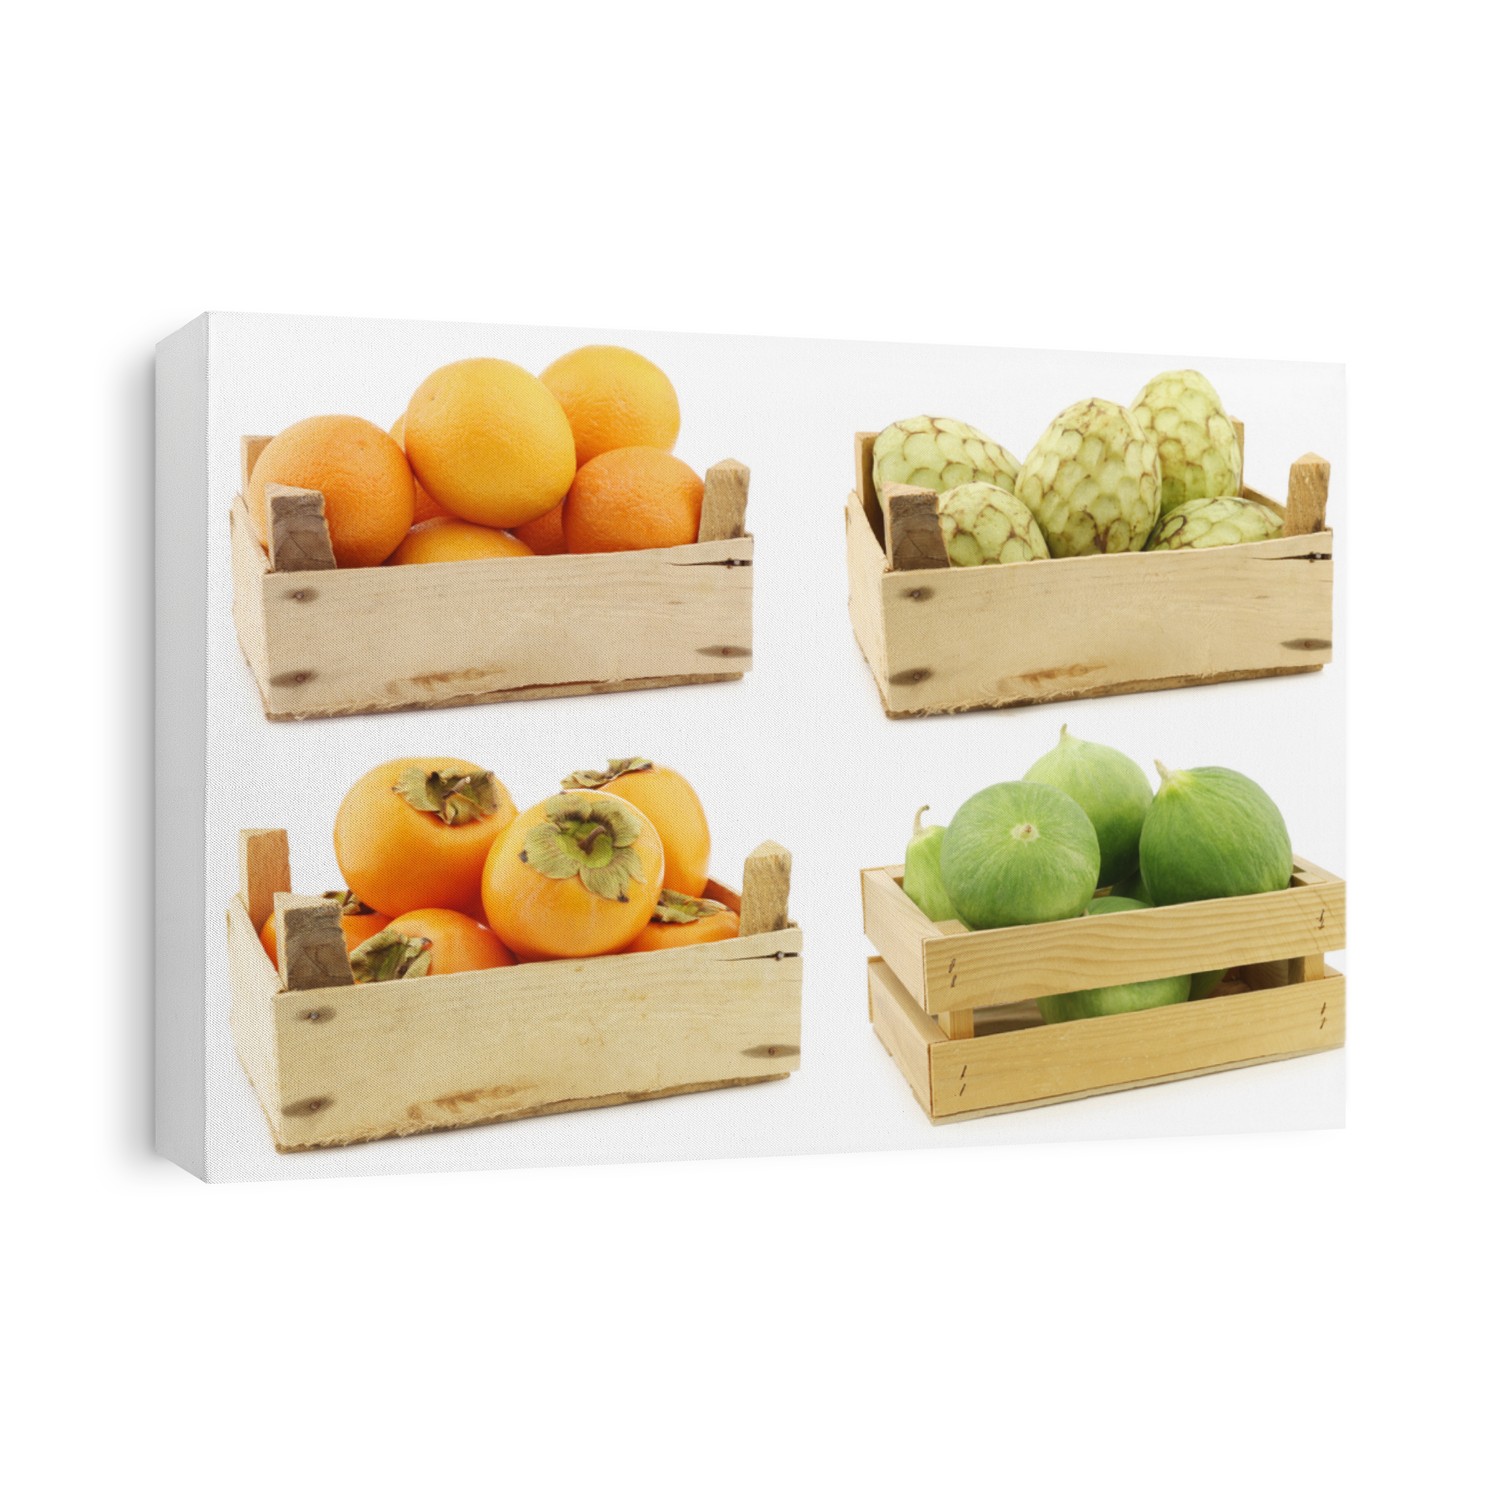 fresh oranges, cherimoya fruit  (Annona cherimola), kaki fruit and cumelo's (mix between a cucumber and a melon) in a wooden crate on a white background